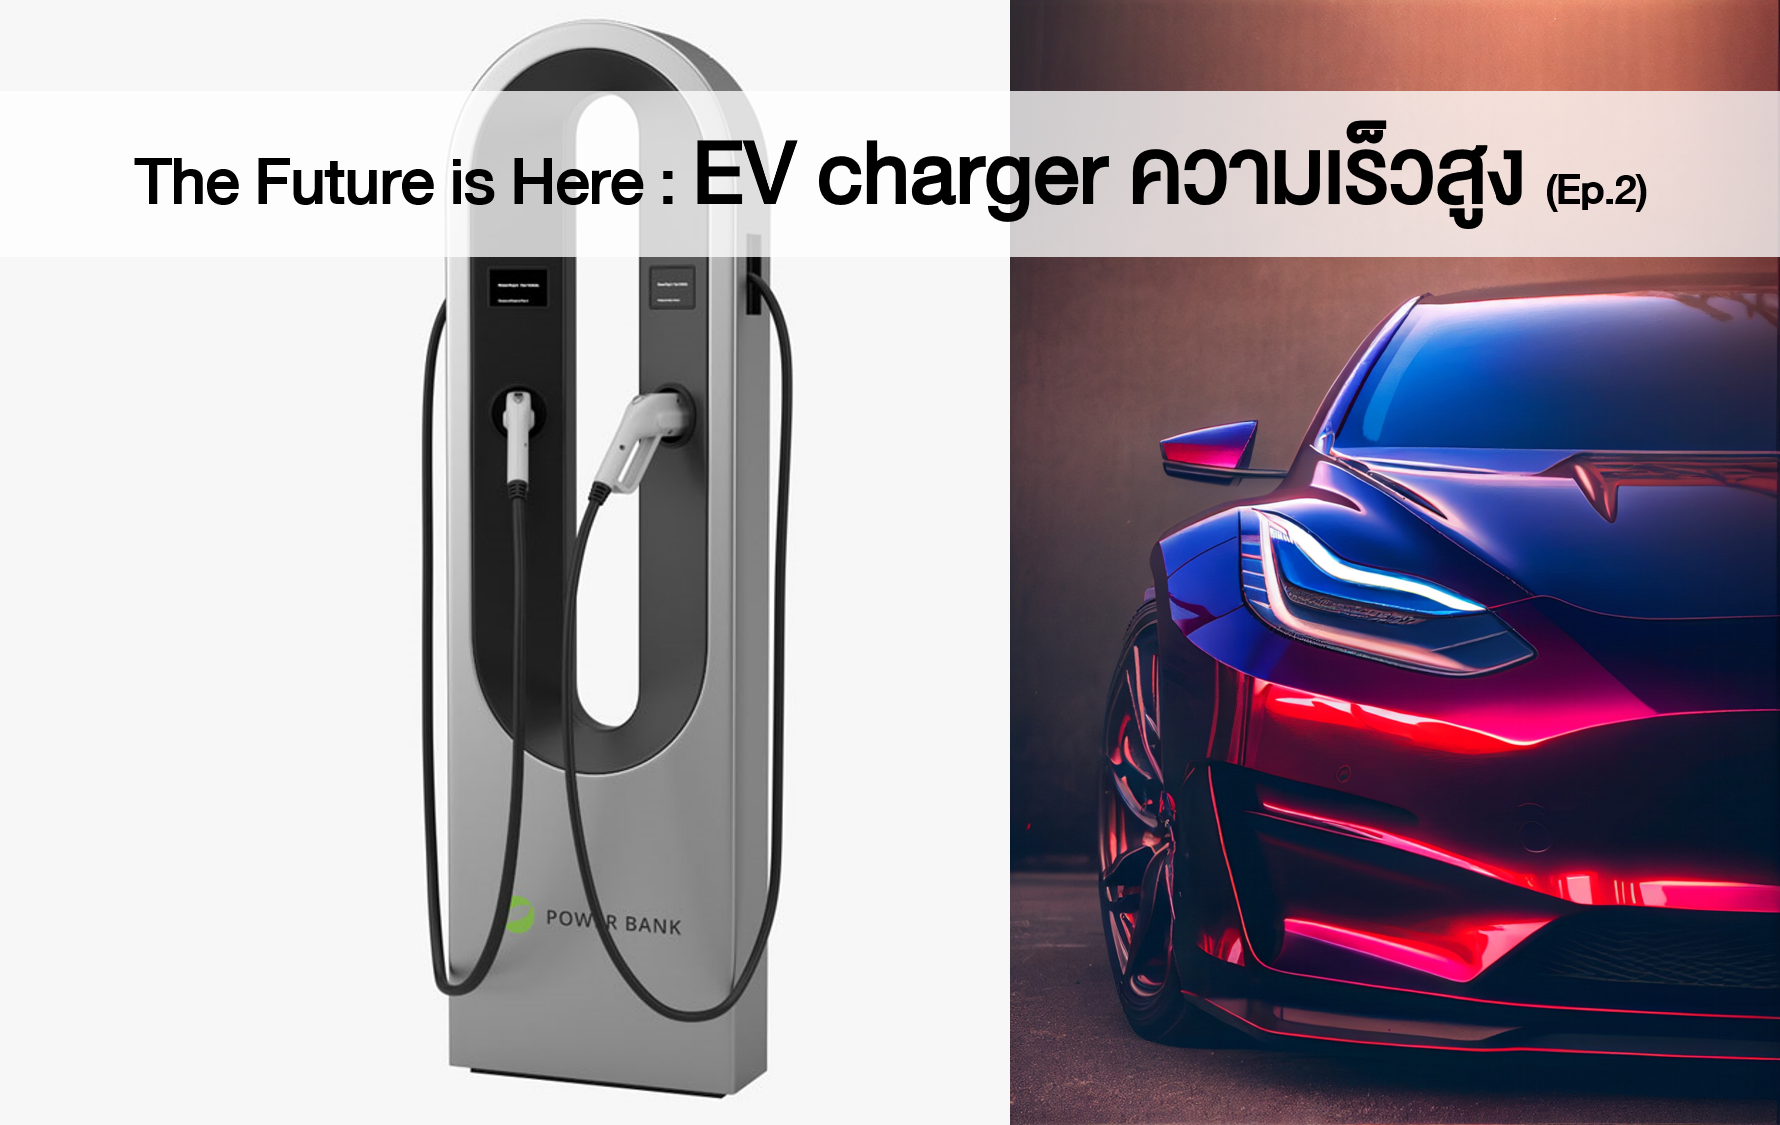 The Future is Here : EV charger ความเร็วสูง (Ep. 2)